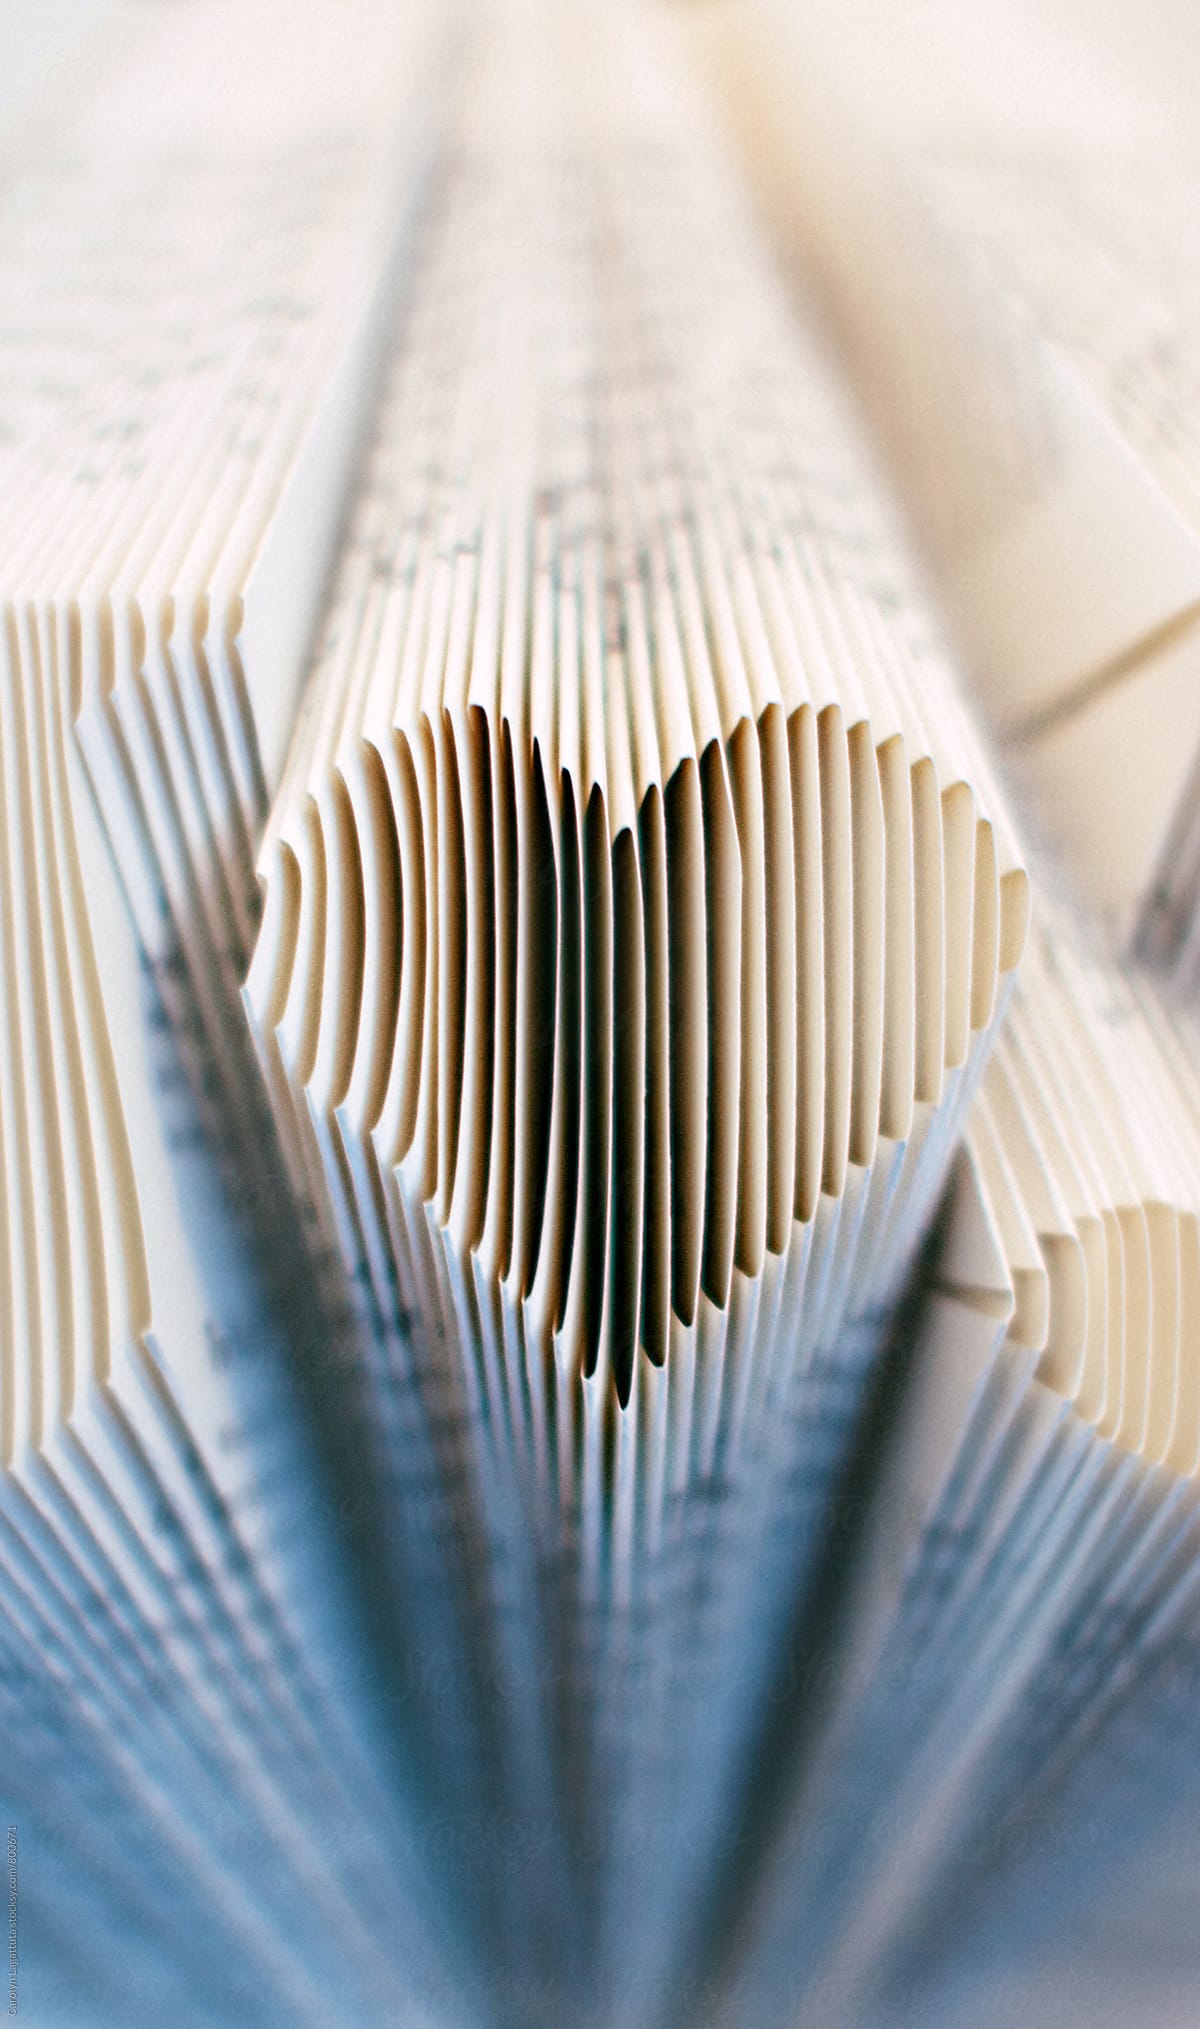 Pages of a book cut into the shape of a heart